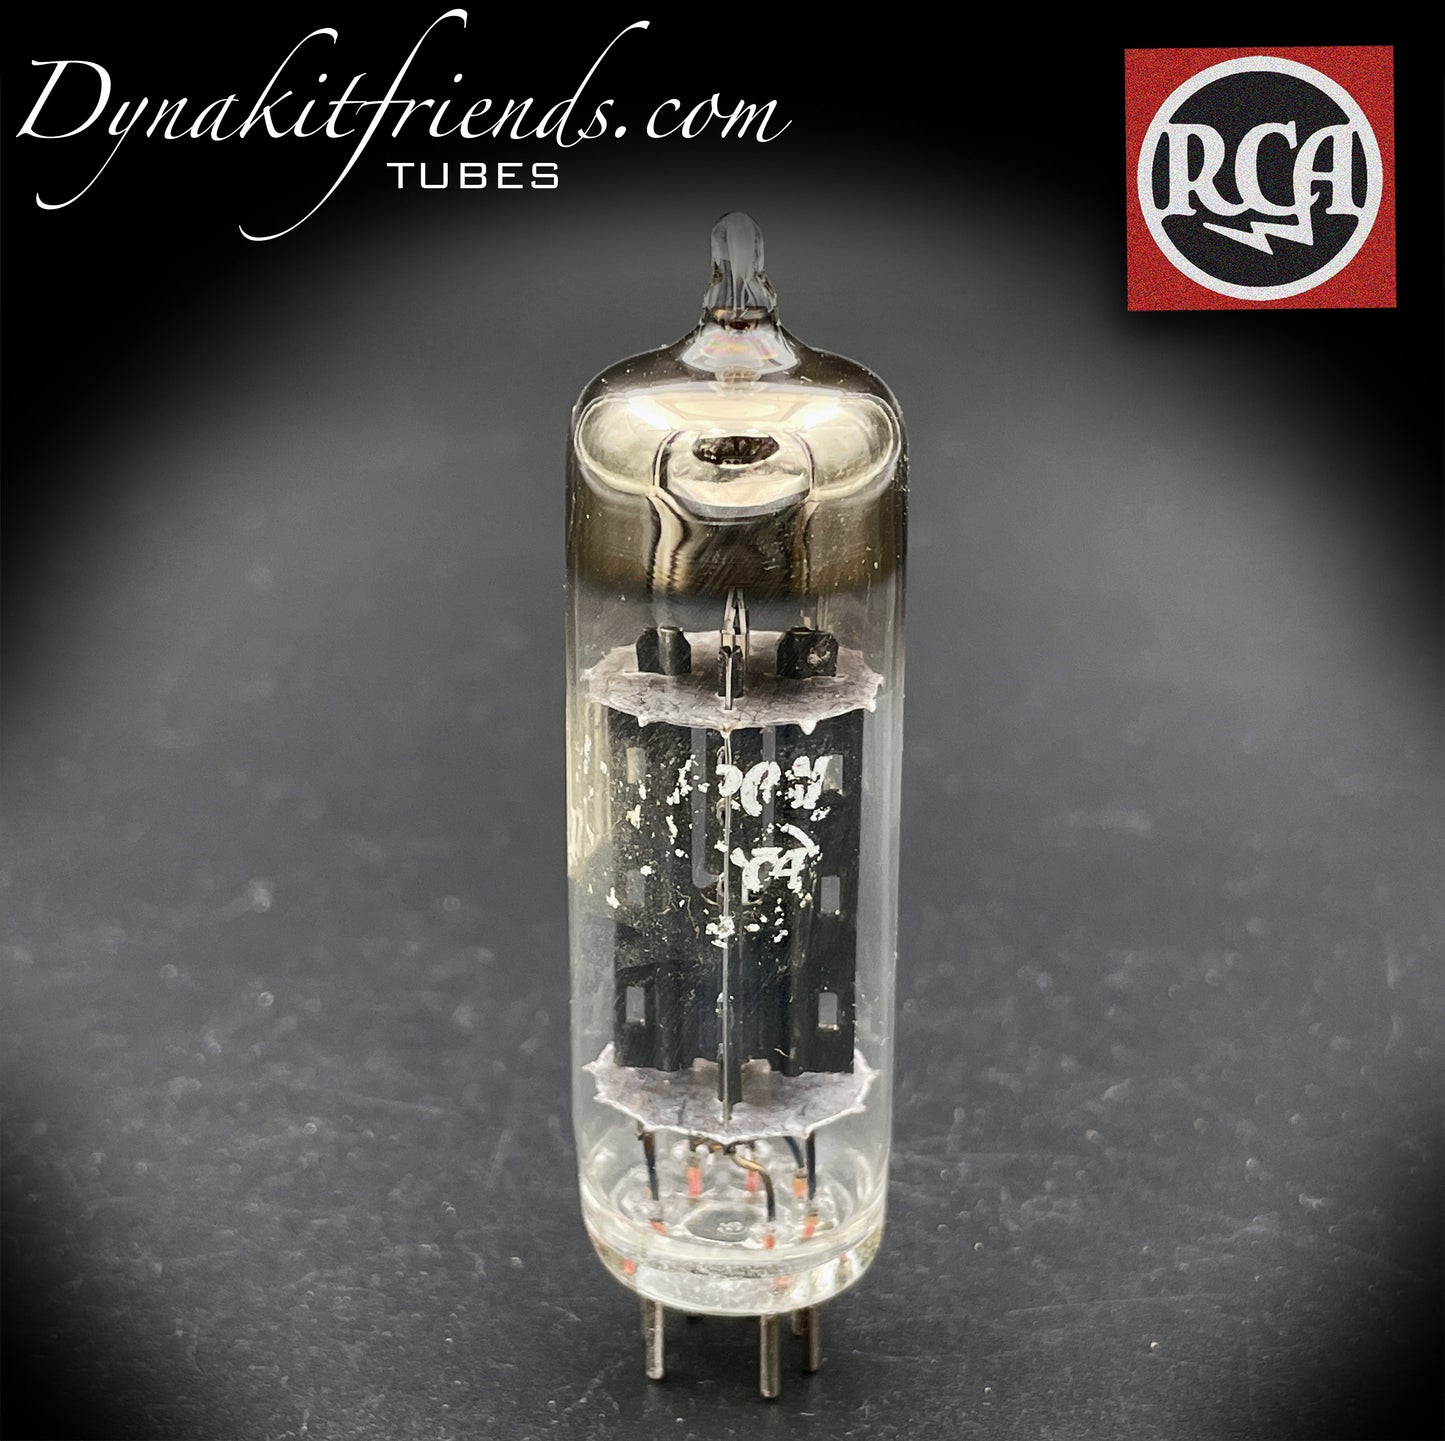 6X4 ( EZ90 ) RCA RECTIFIER MADE 1950s with FOIL DIMPLED GETTER for AUDIO NOTE